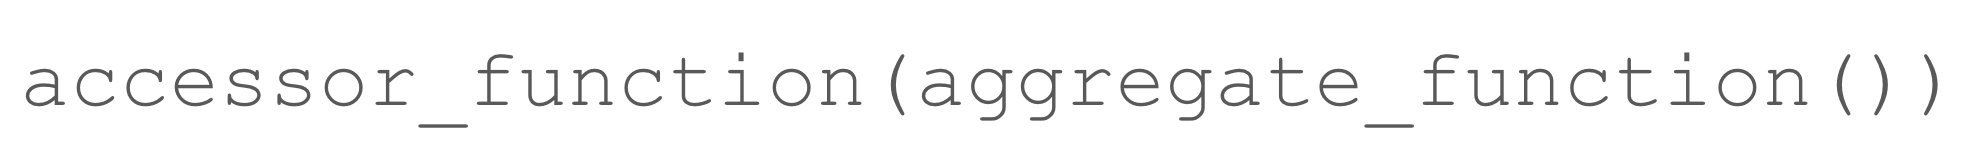 acessor_function (aggregate_function())